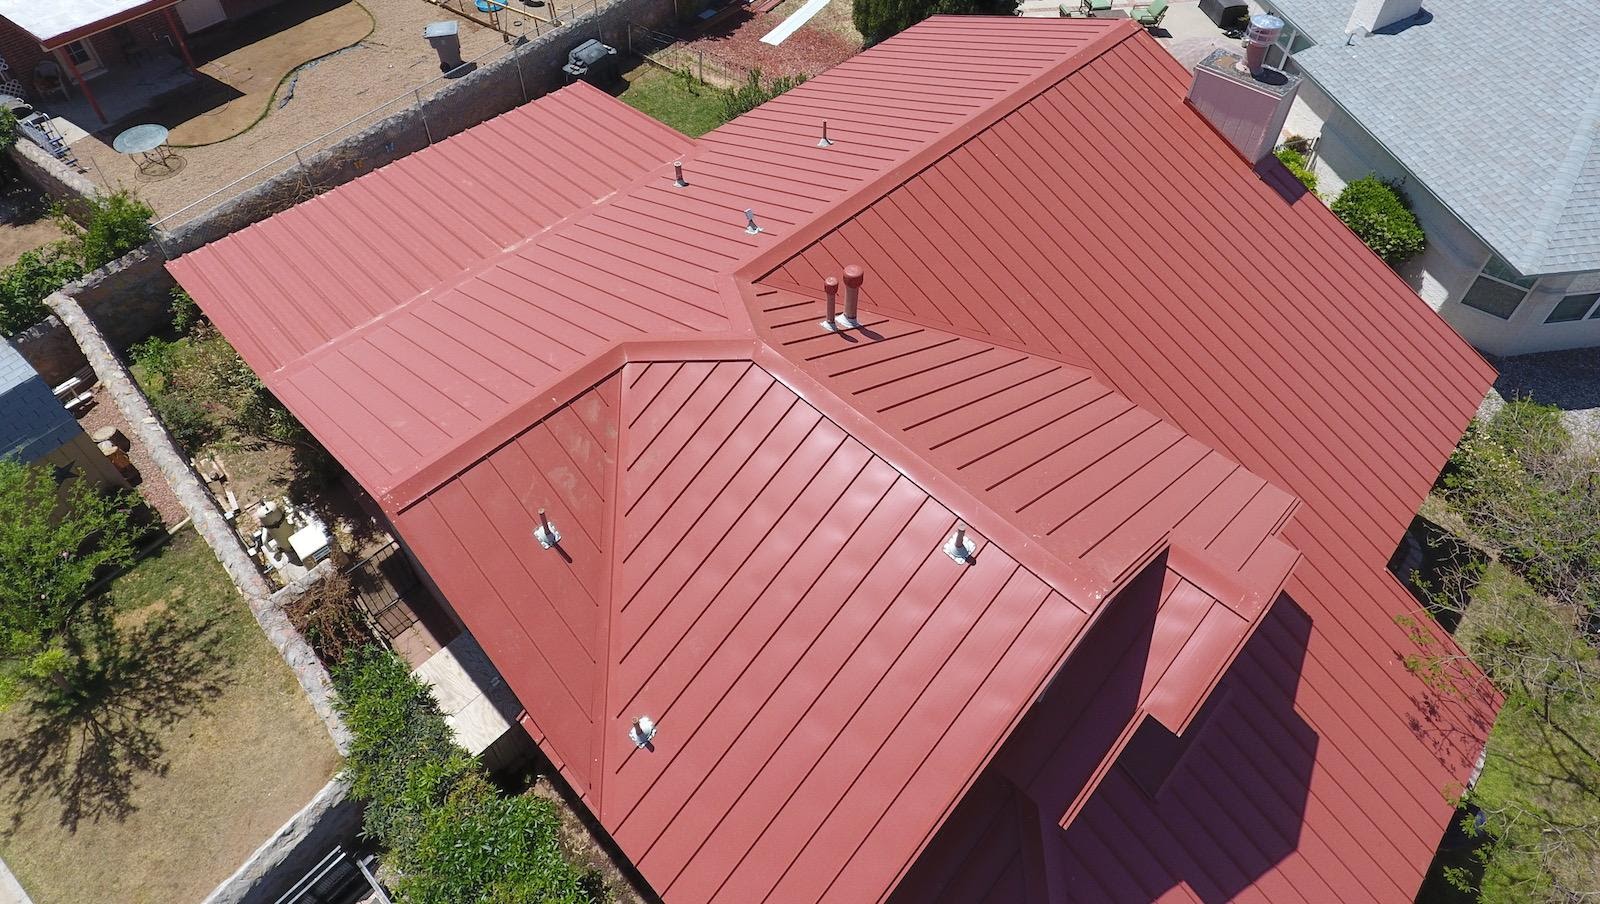 A metal roof over a residential property in El Paso